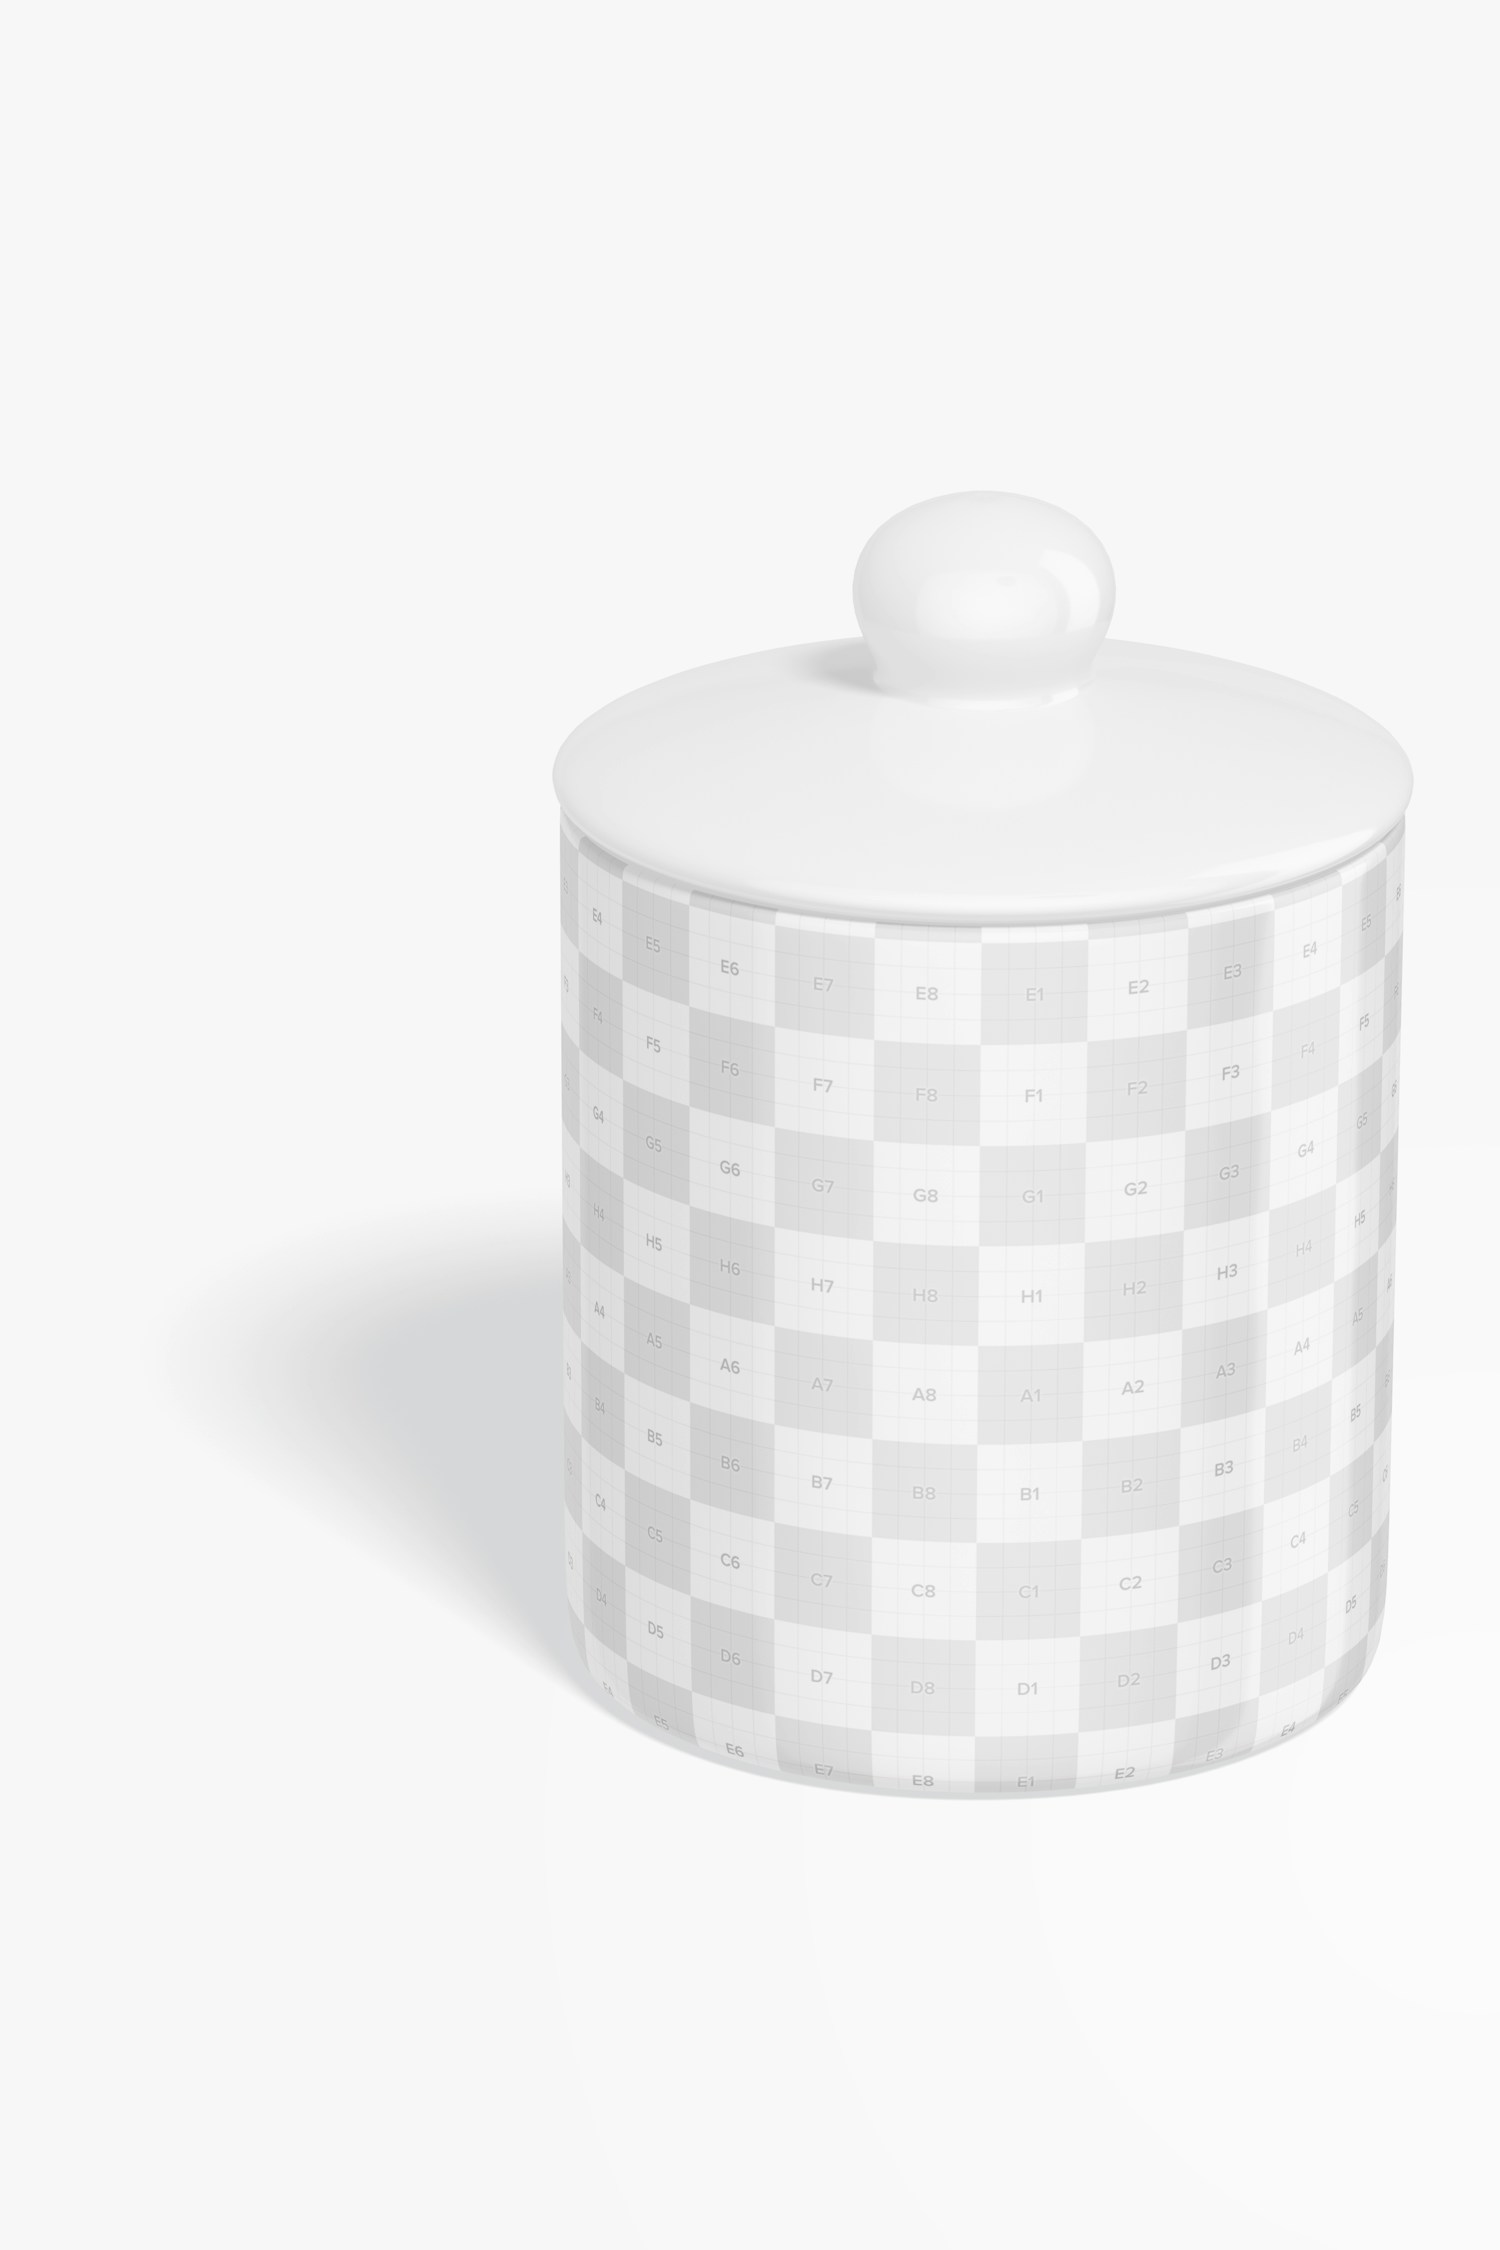 Coffee Canister Mockup, Perspective